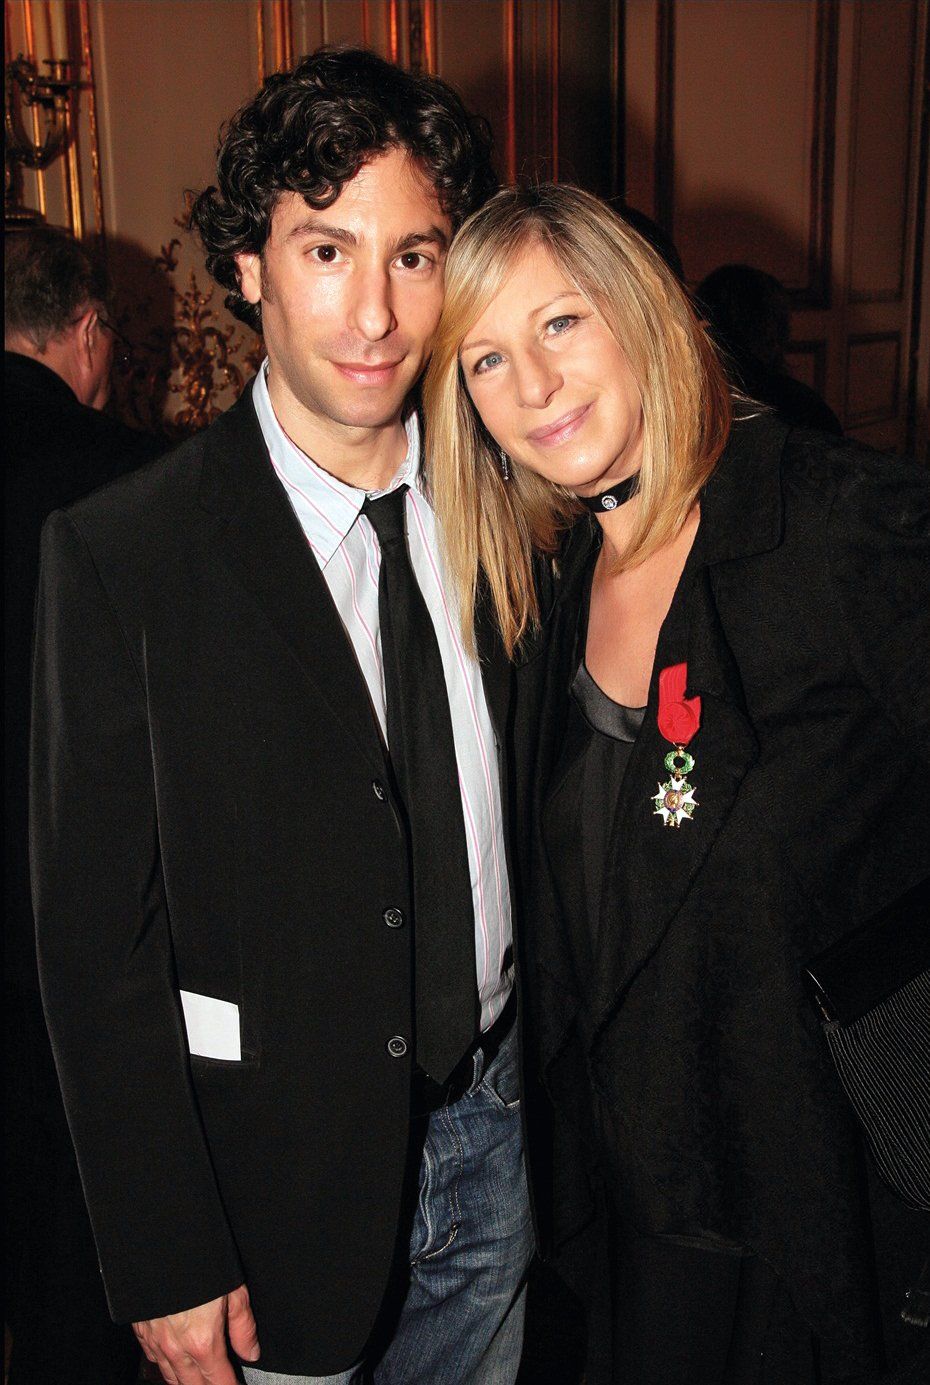 Jason Gould poses with his mother, Barbra Streisand, wearing the medal of the French Legion of Honor.